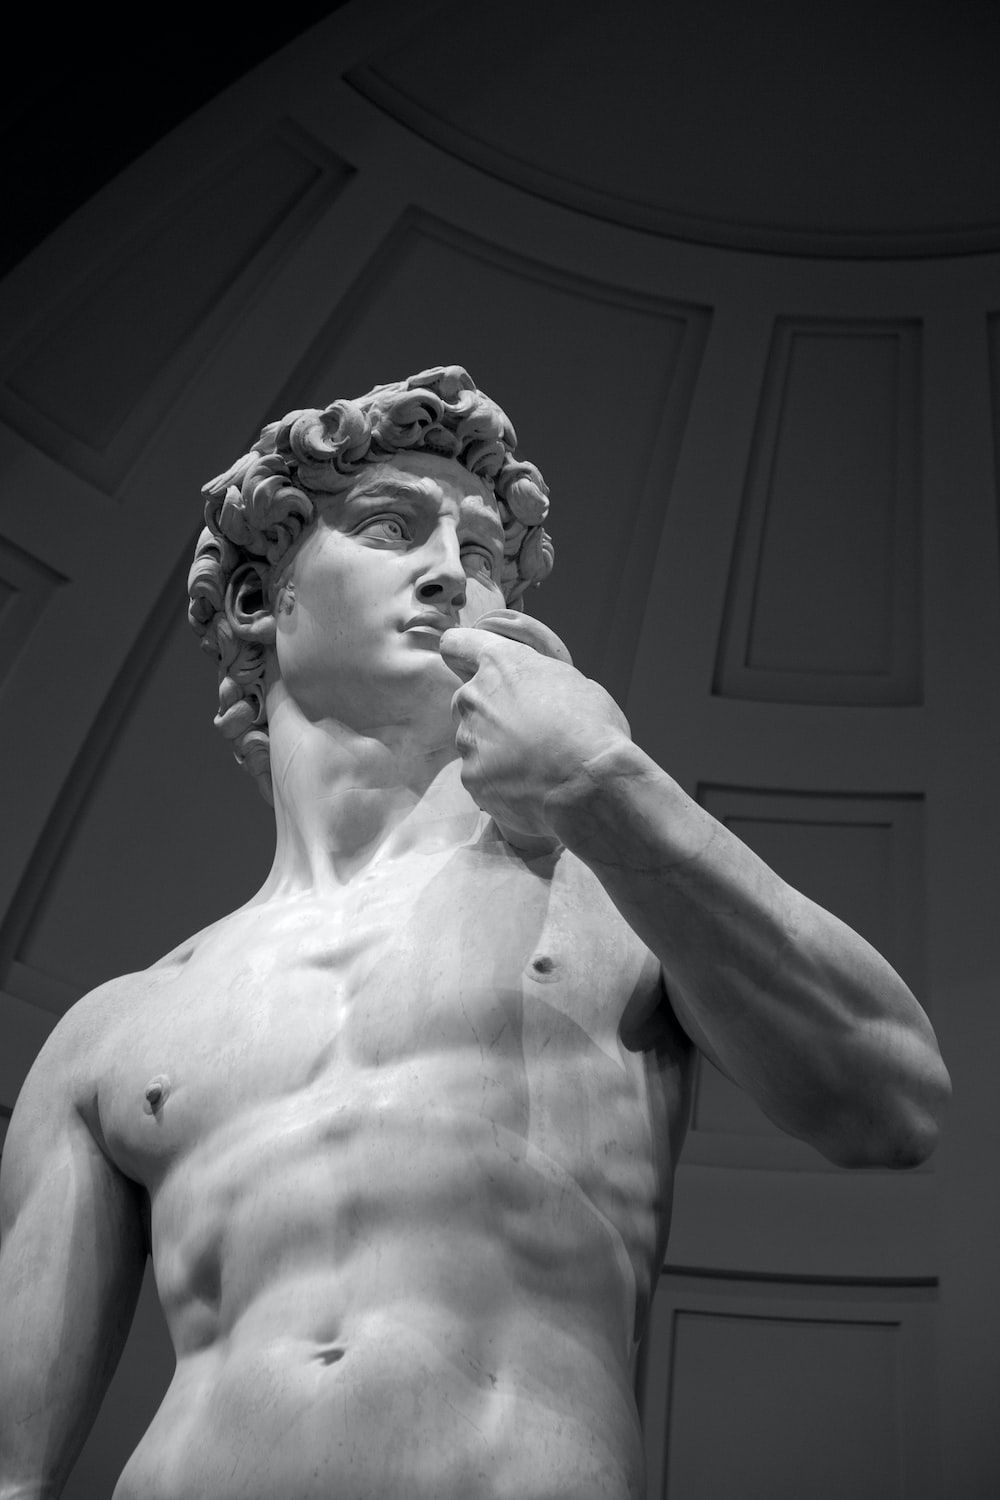 David is a statue of the biblical hero David, by Michelangelo, located in Florence, Italy. - Greek statue